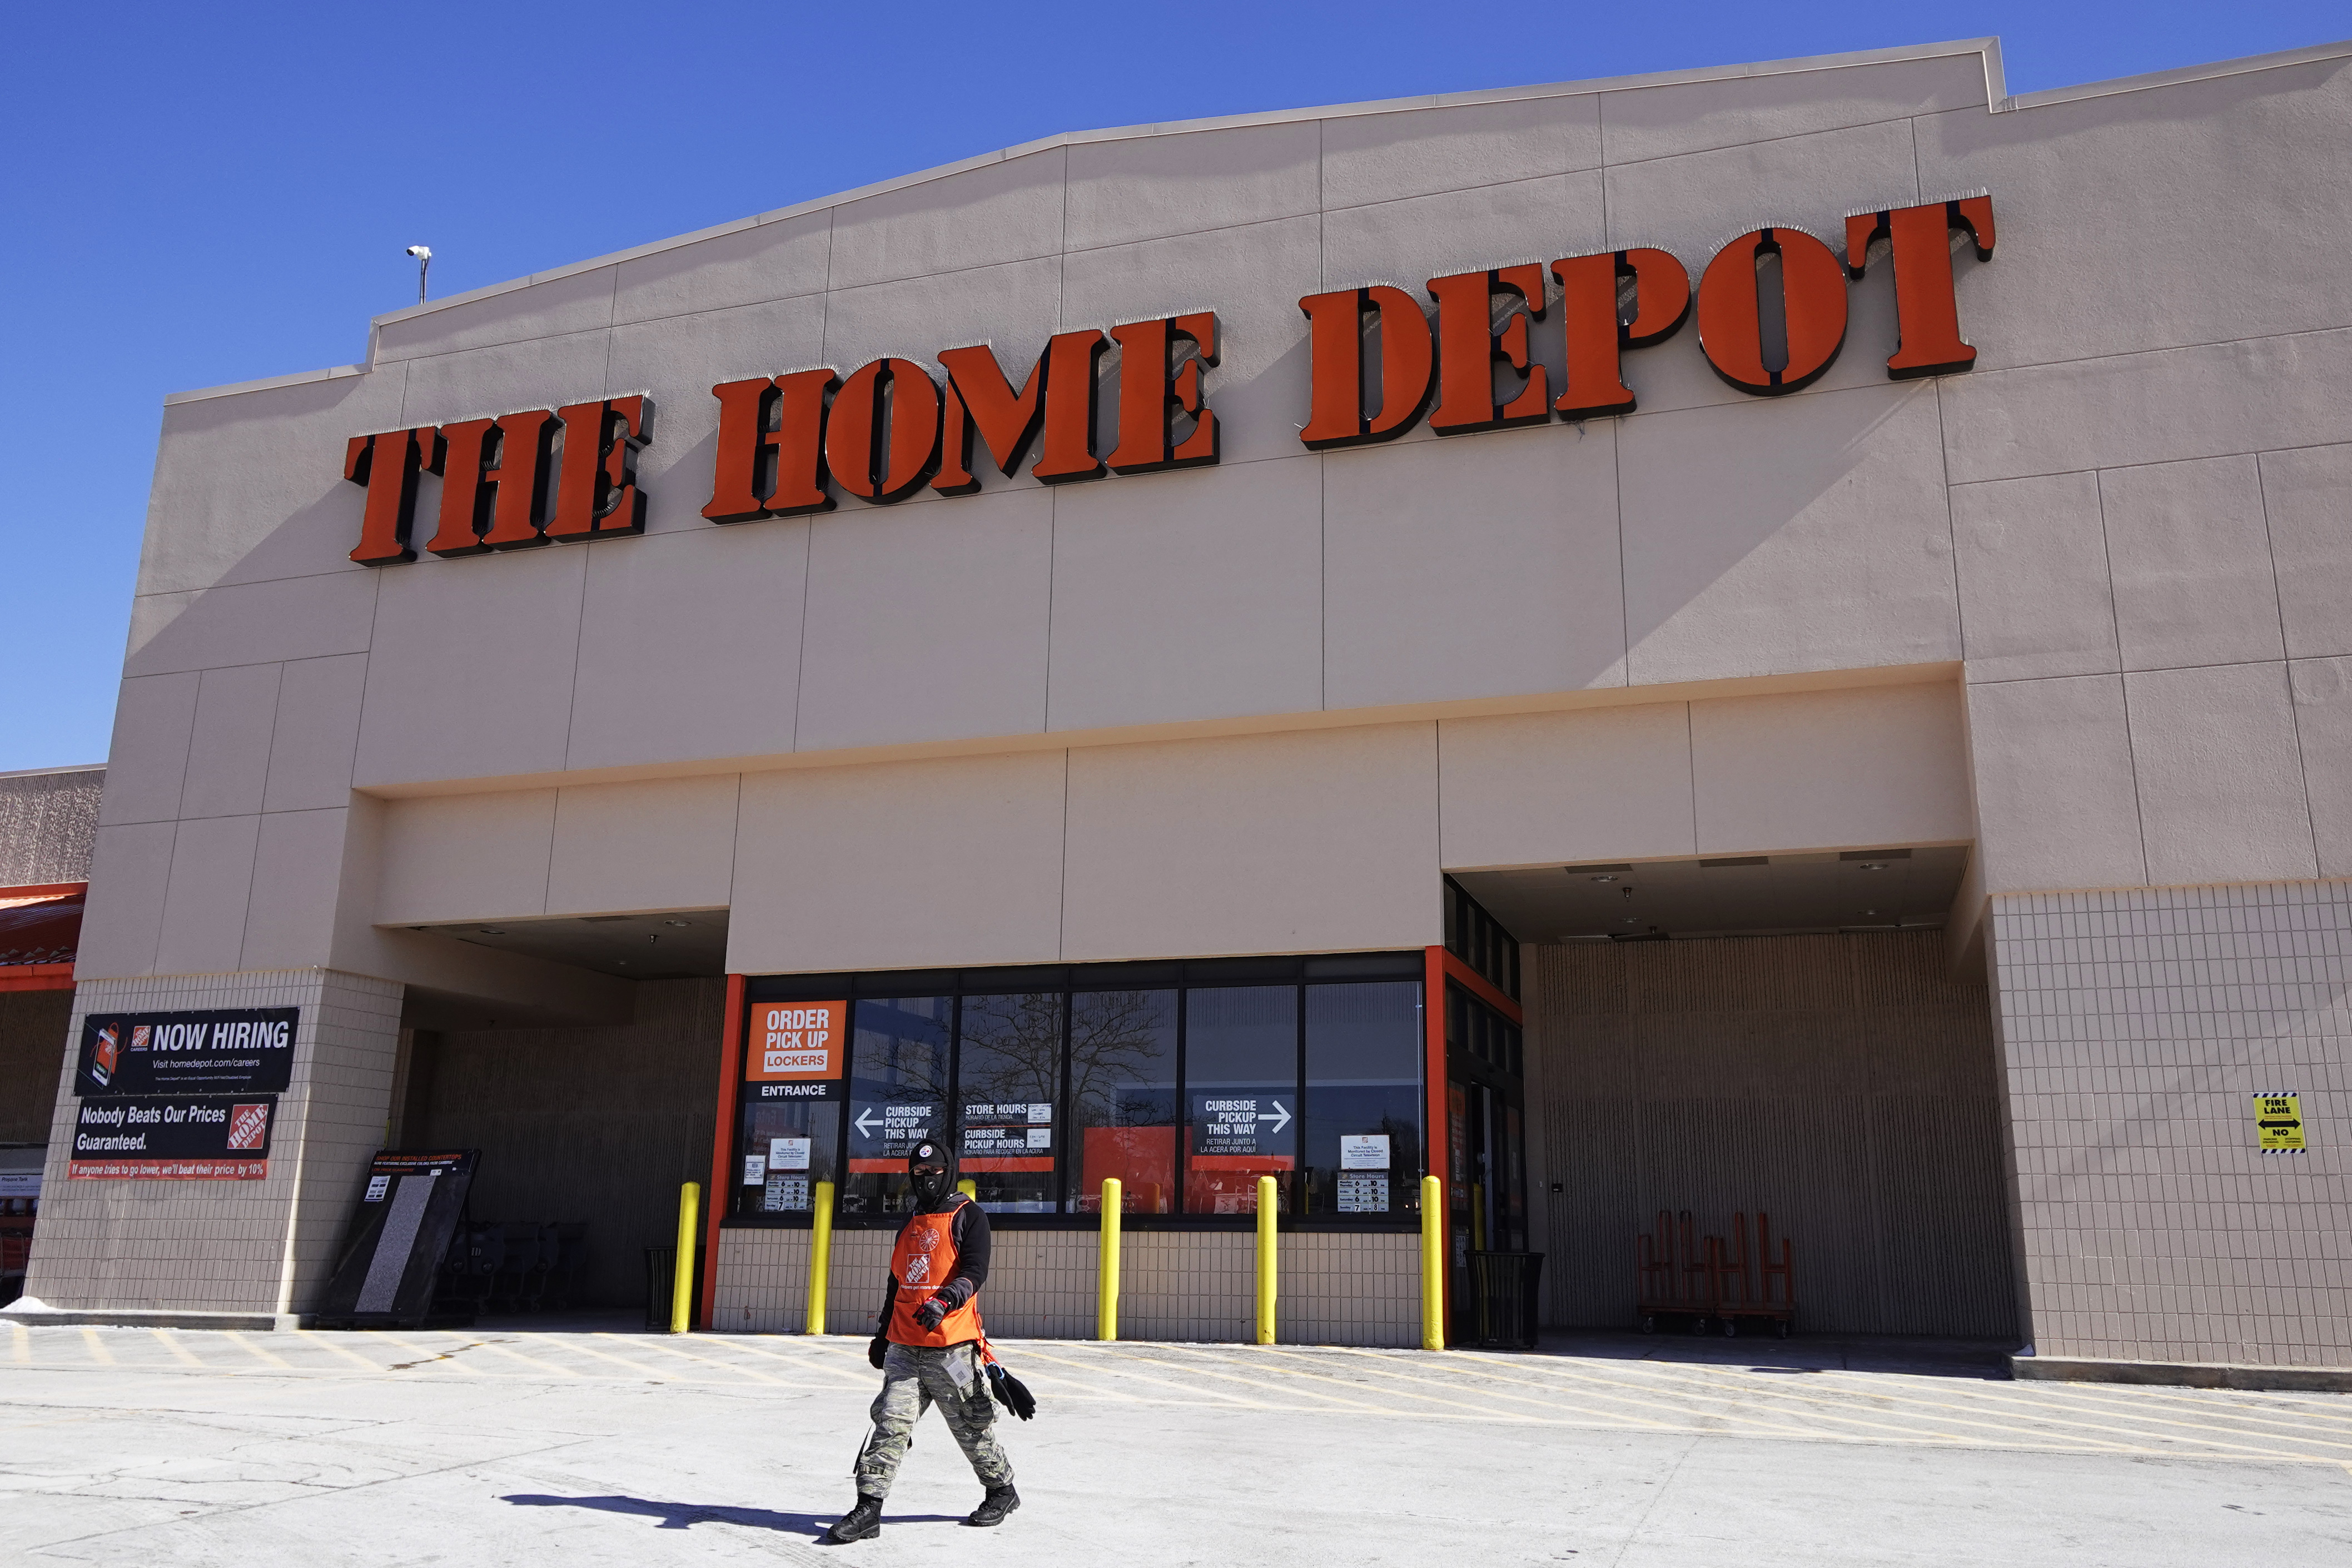 Home Depot to open new distribution center in Macomb County